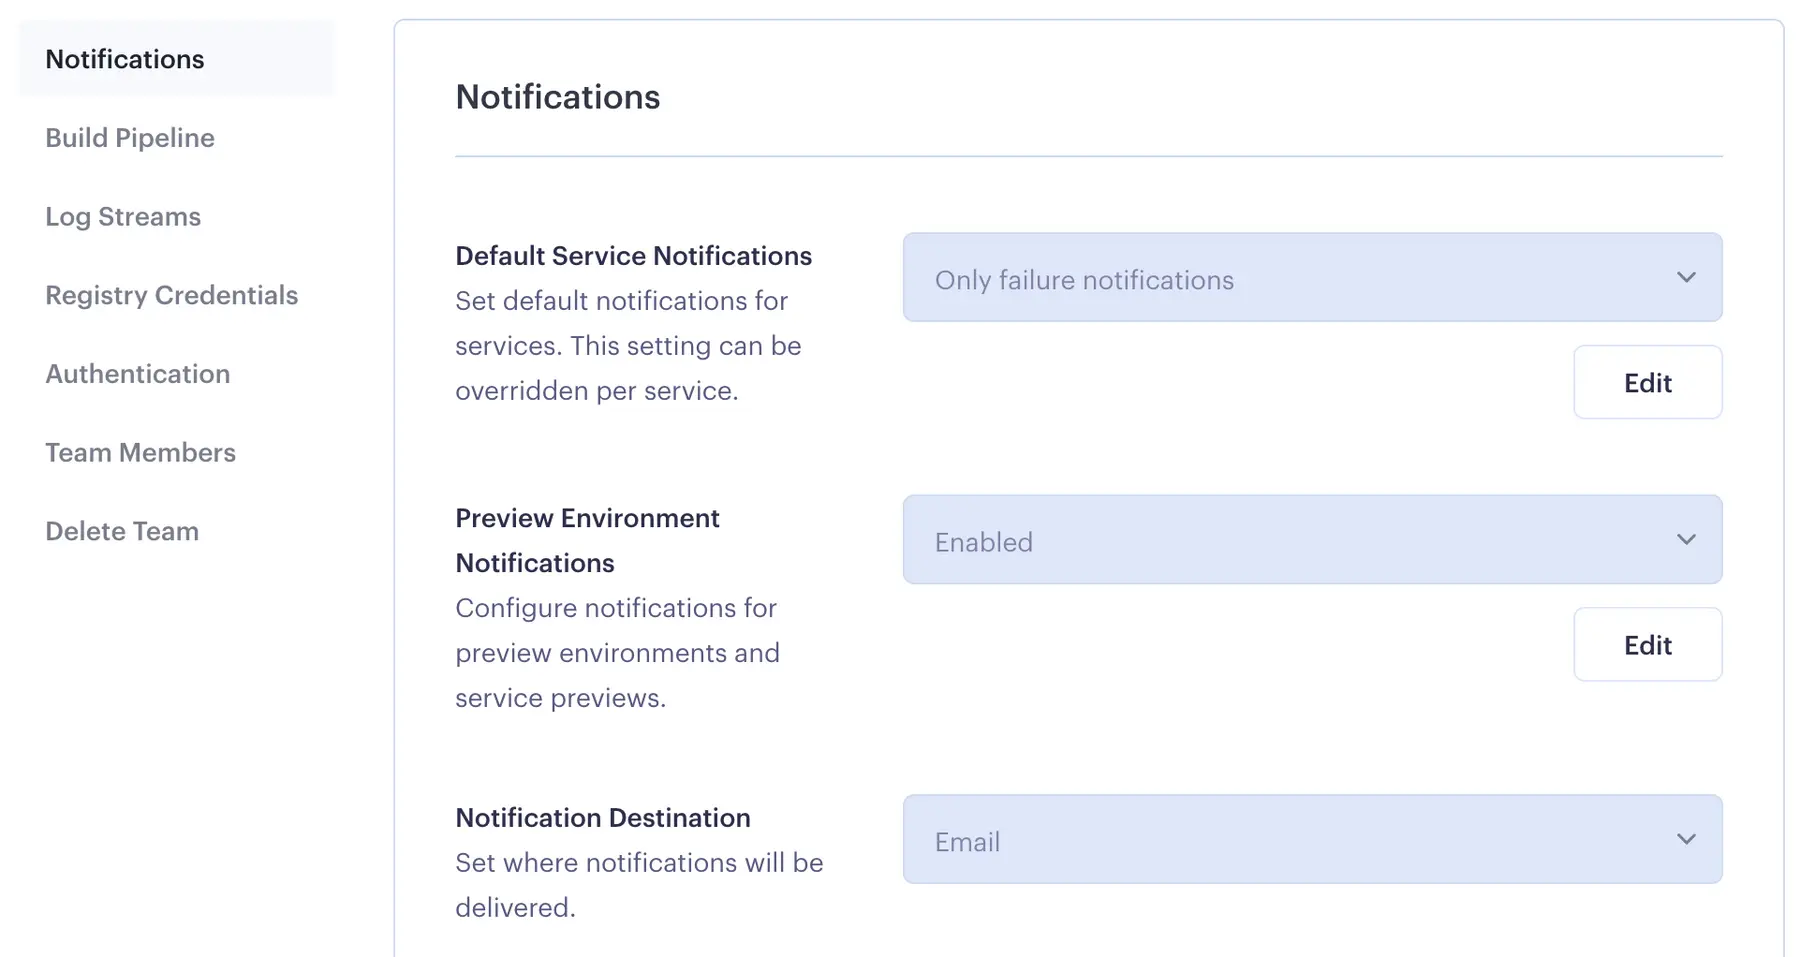 Account-wide notification settings